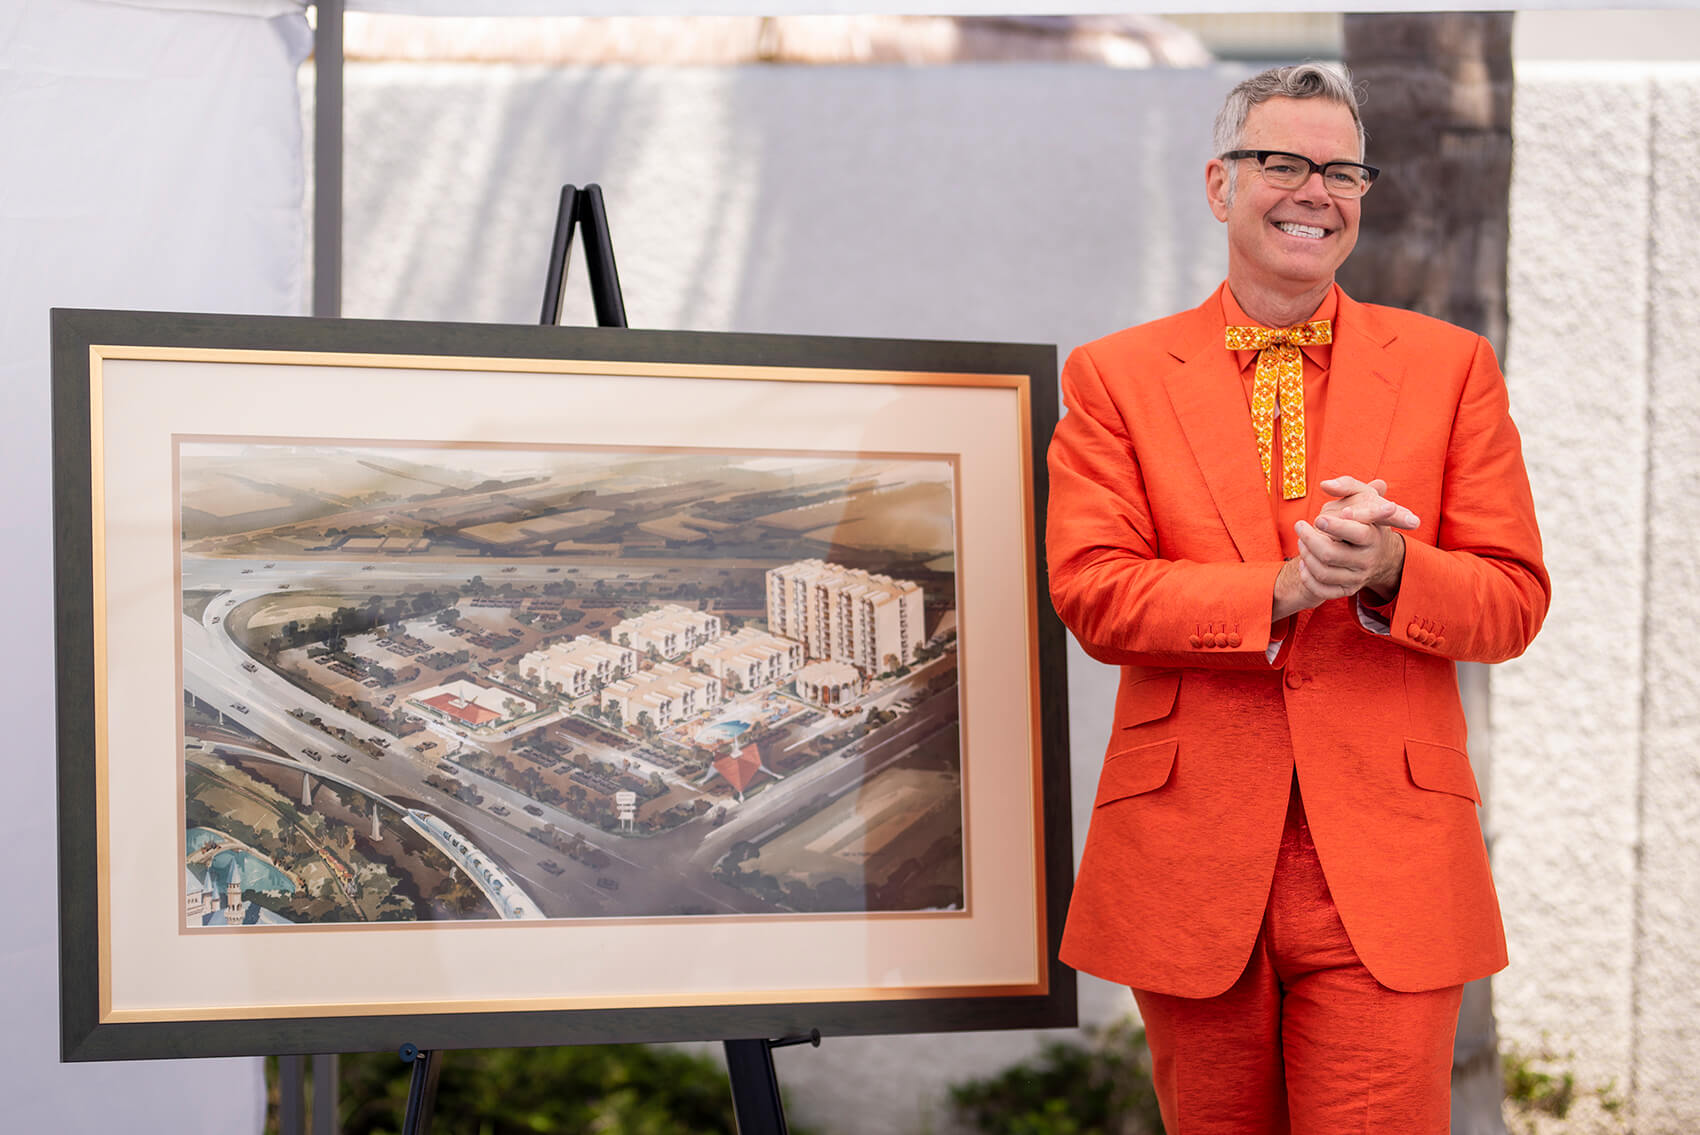 Charles Phoenix poses next to the original architectural rendering of the hotel